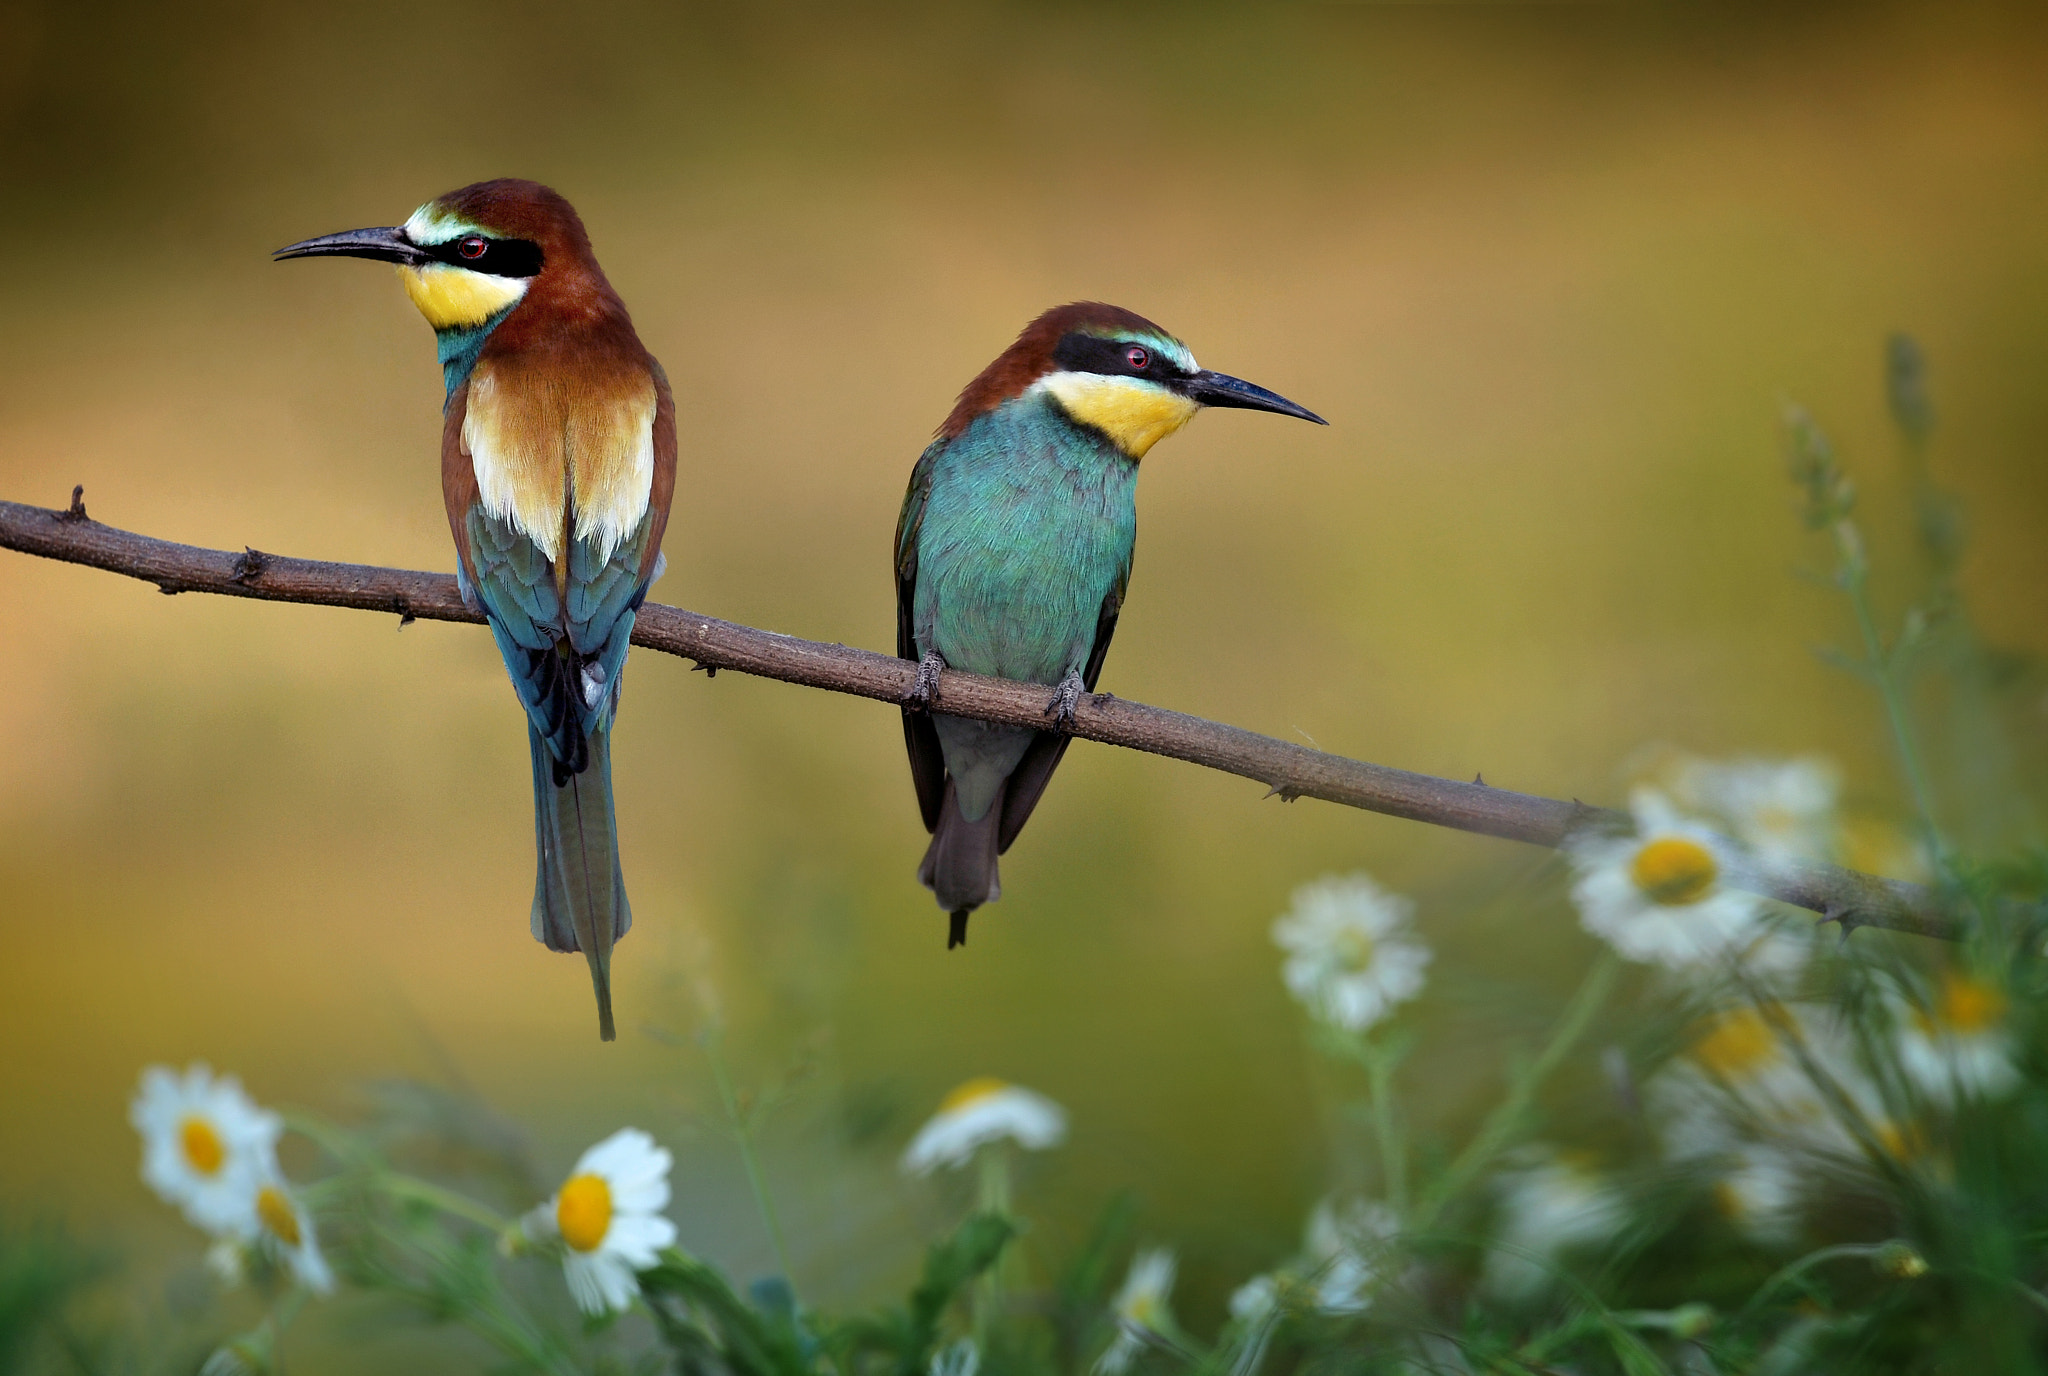 Nikon D3 sample photo. Merops apiaster (bee eater), with daisies photography